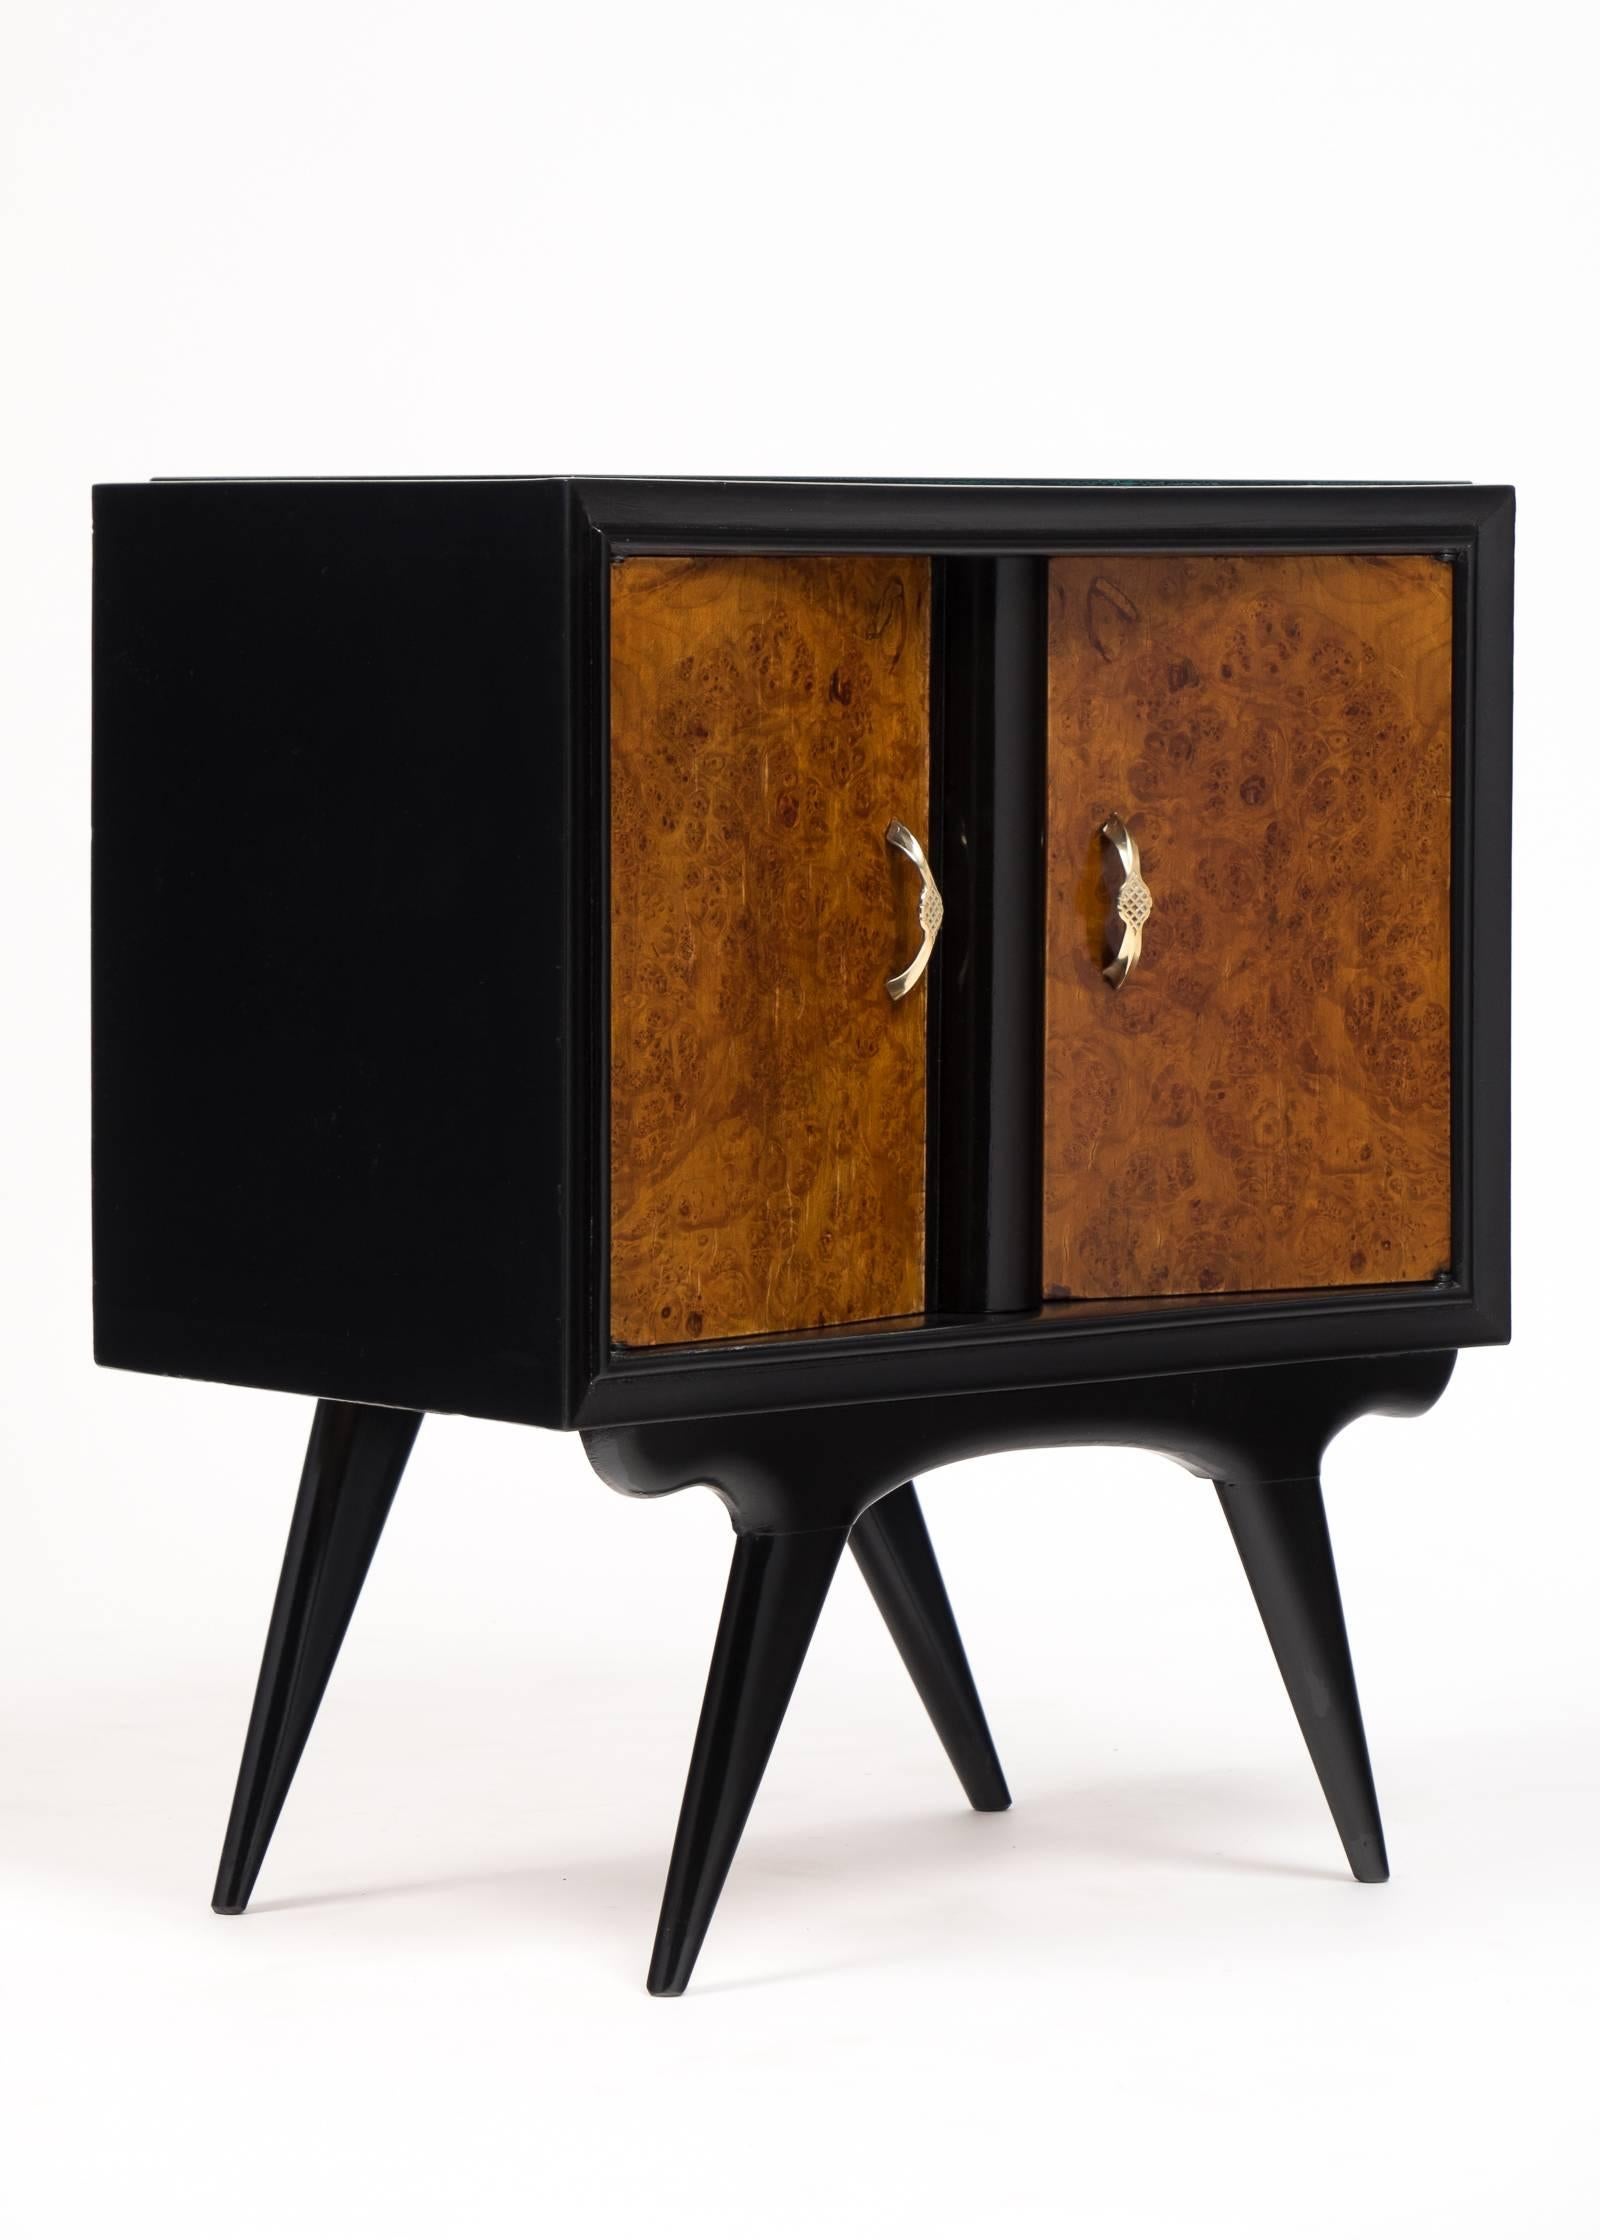 Mid-20th Century Italian Modernist Pair of Side Tables in the Manner of Paolo Buffa